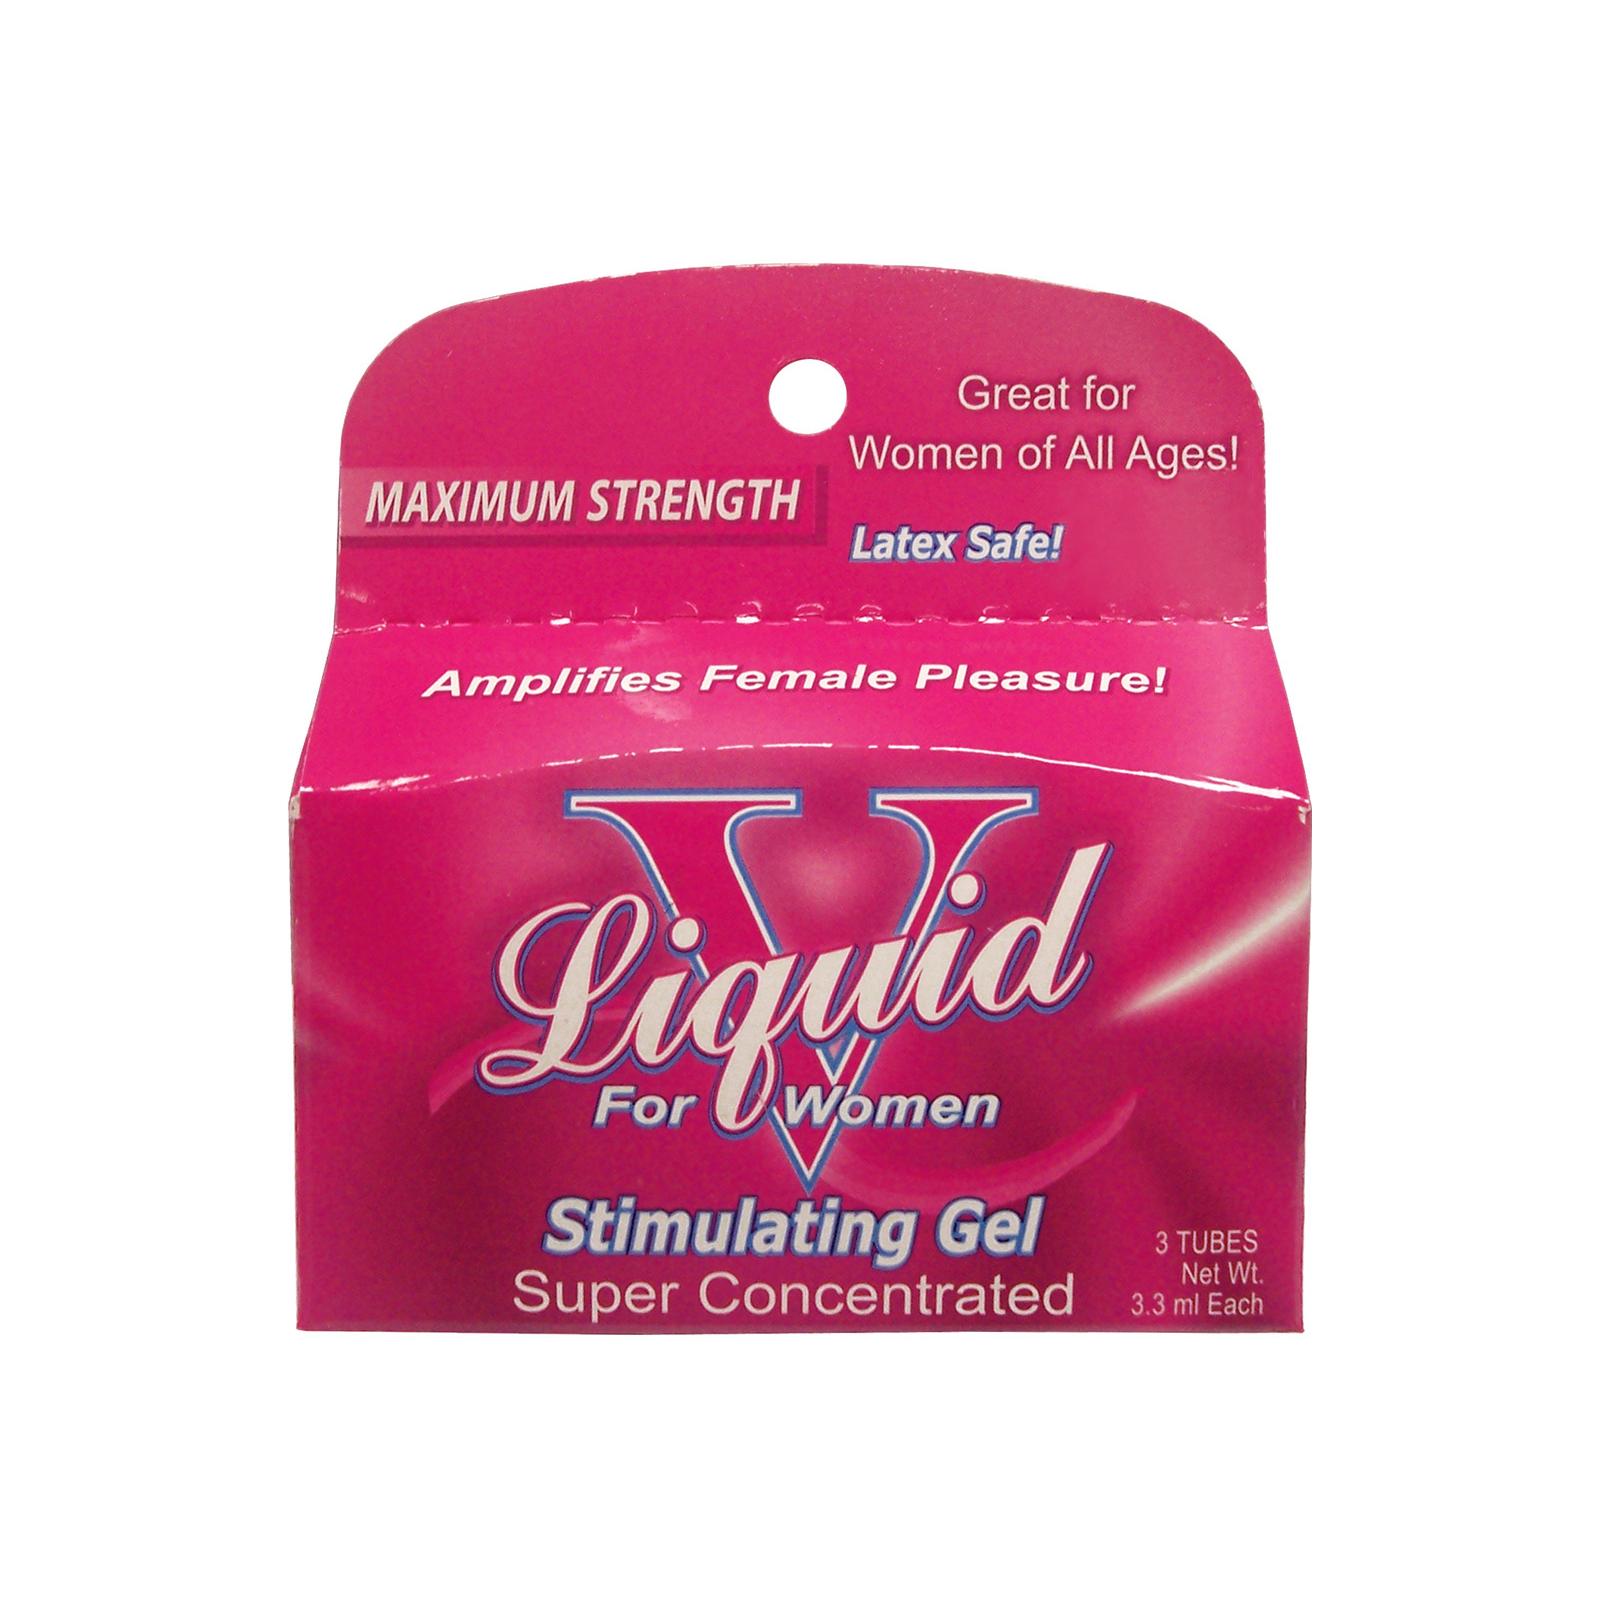 Body Action Products Liquid V Stimulating Gel For Women 3pk Tubes